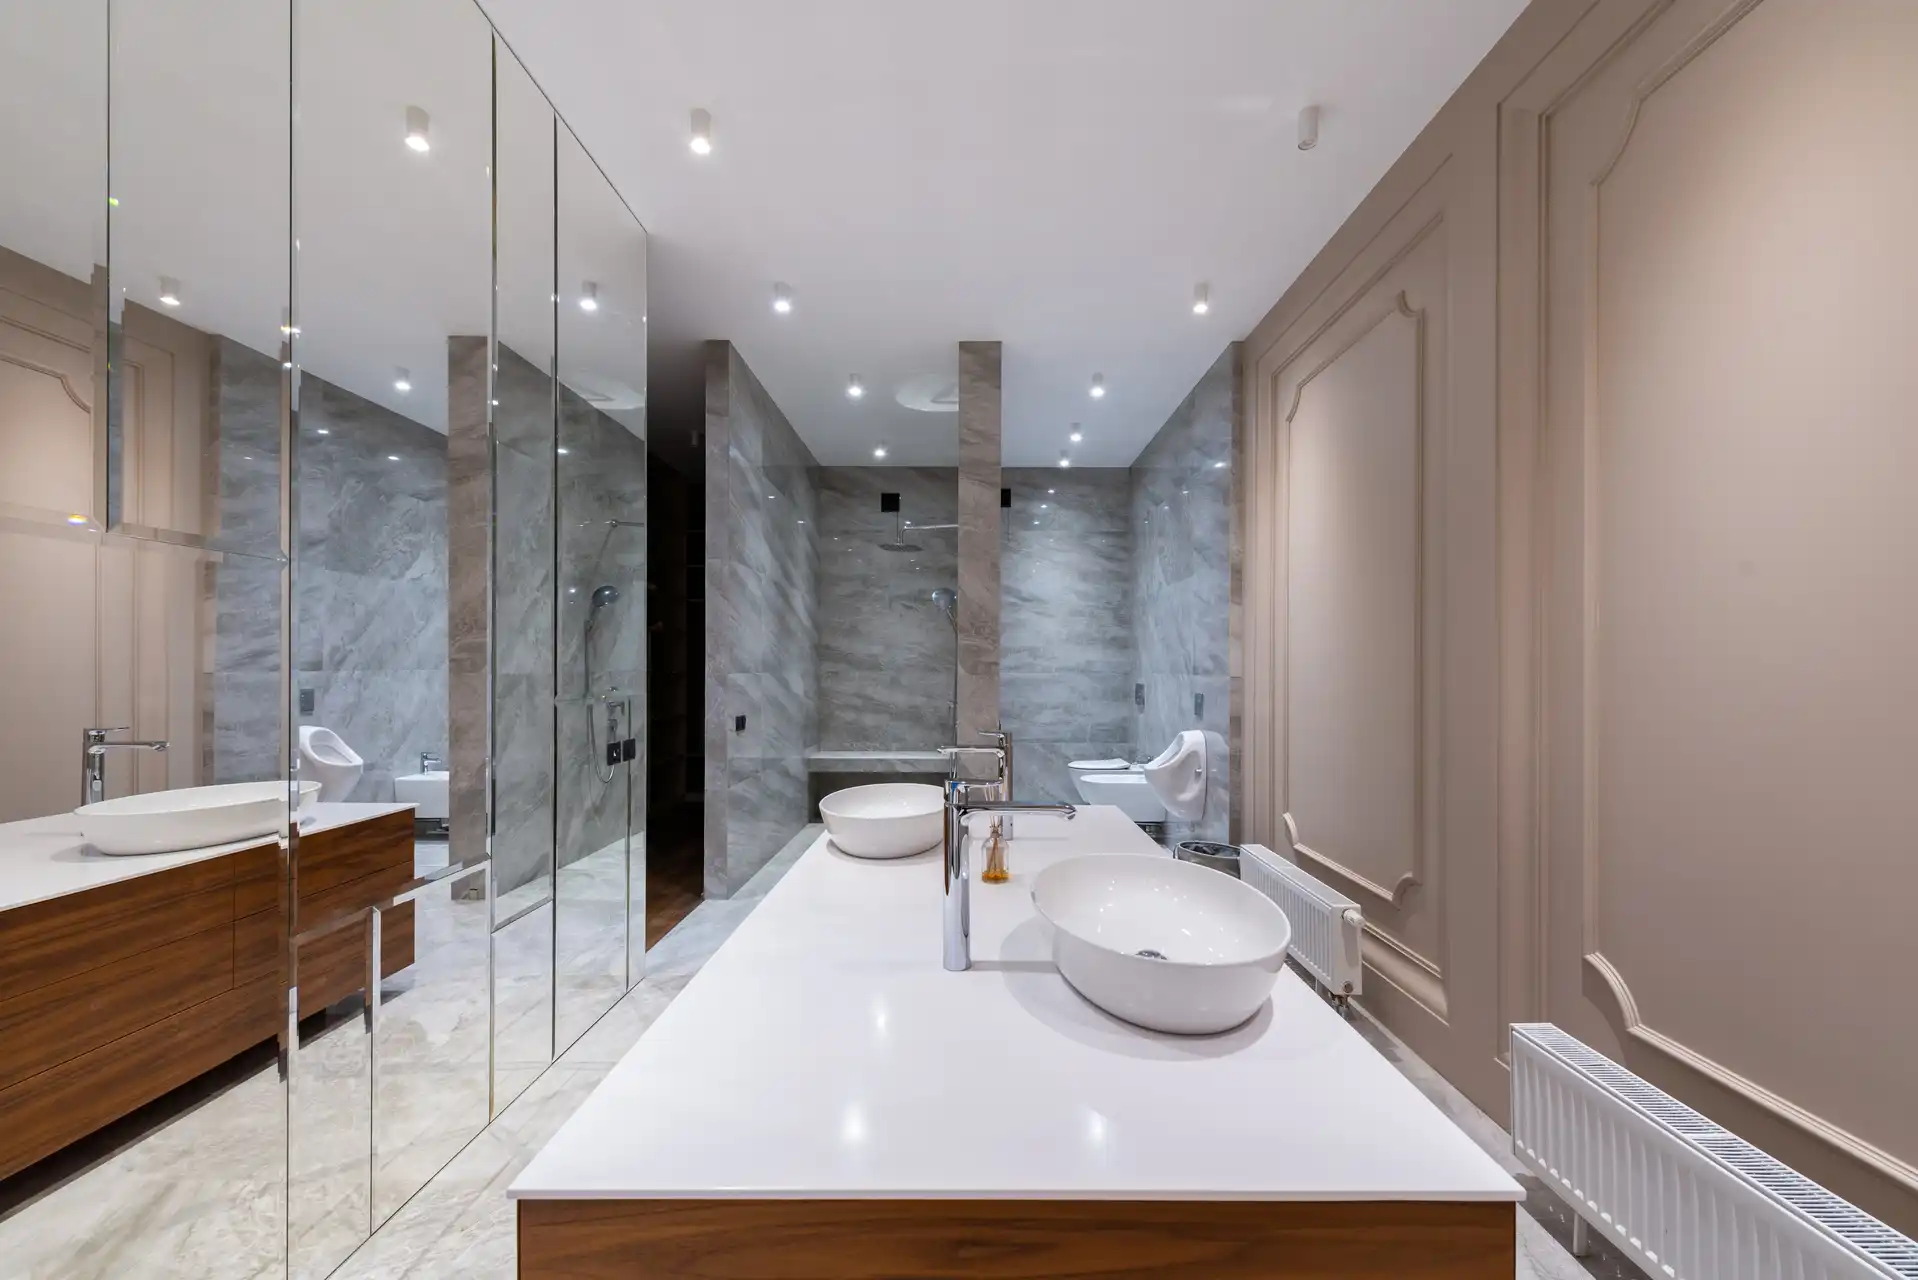 About Chicago Bathroom Remodeling Contractor